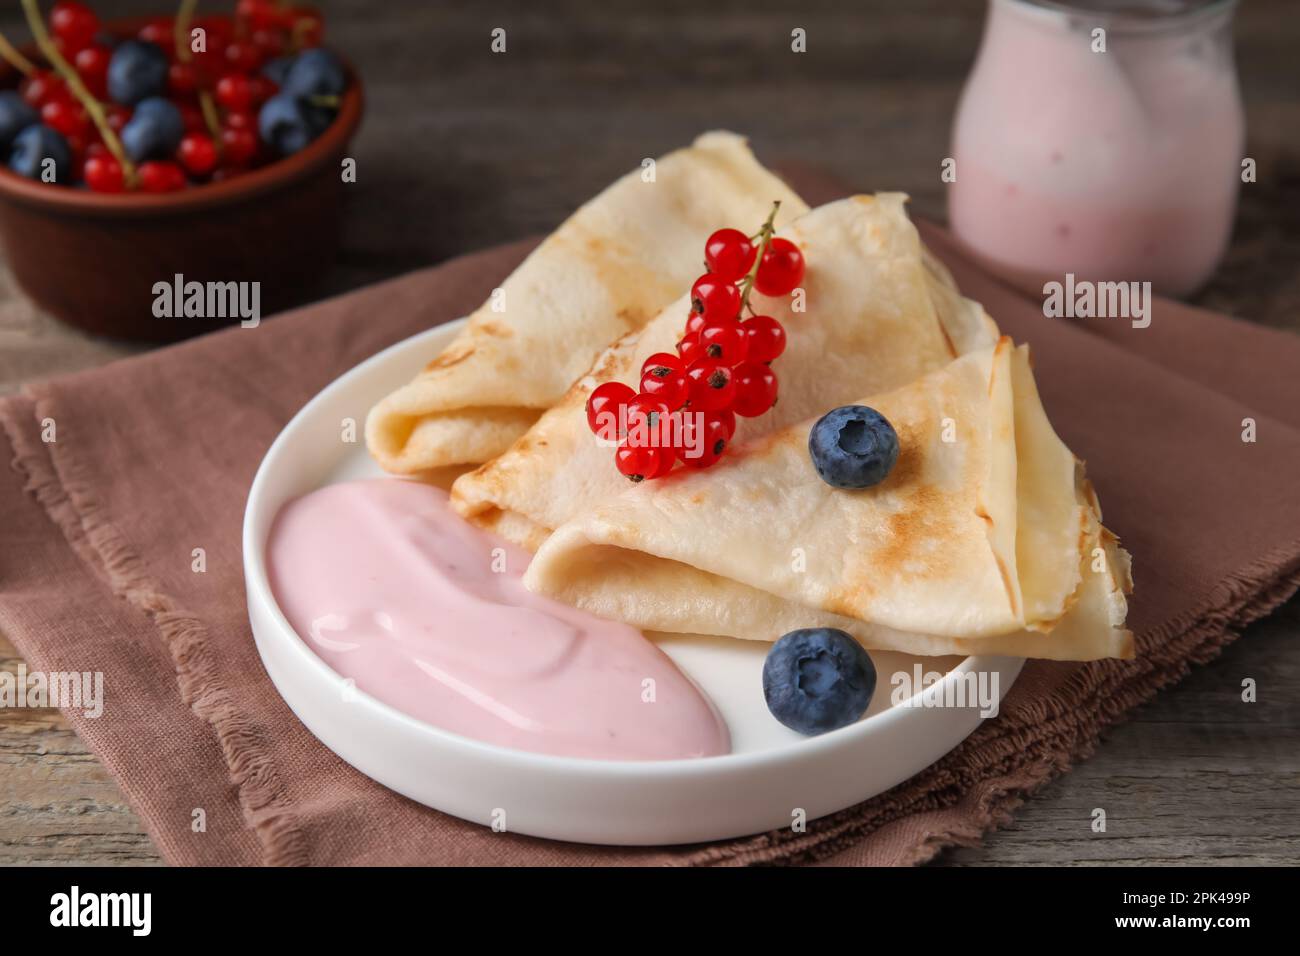 Delicious crepes with natural yogurt, blueberries and red currants on wooden table Stock Photo